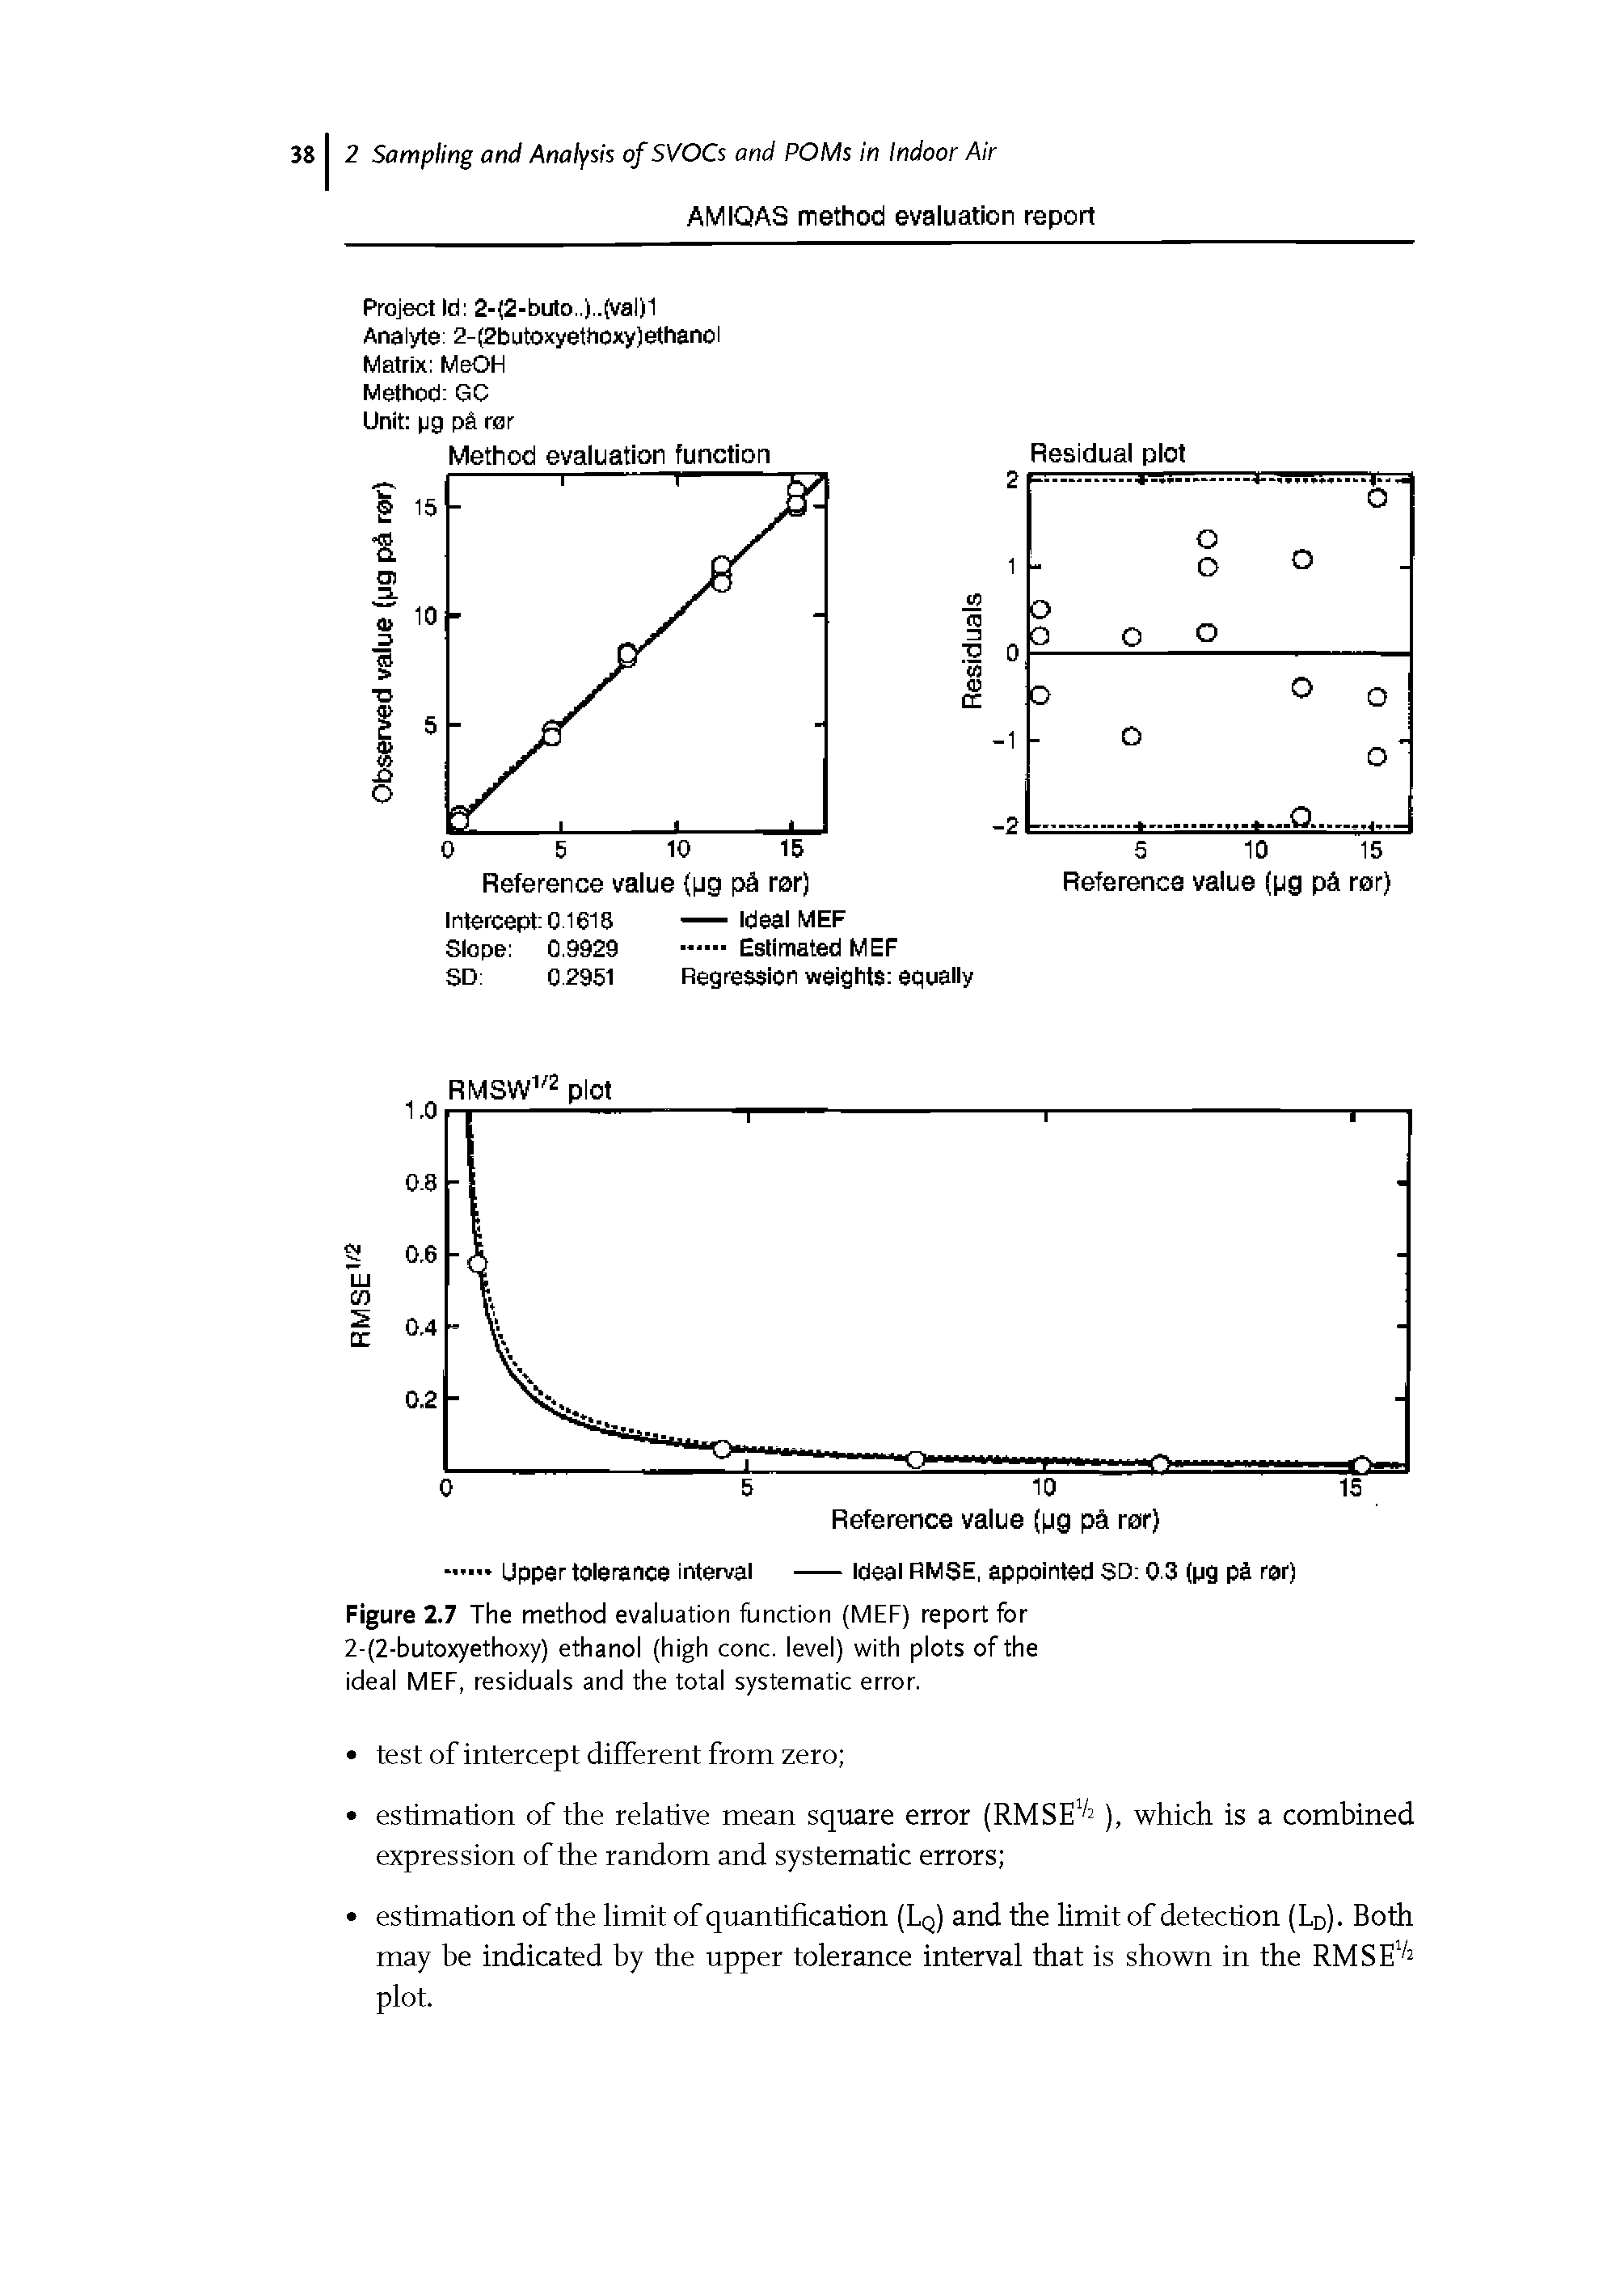 Figure 2.7 The method evaluation function (MEF) report for 2-(2-butoxyethoxy) ethanol (high cone, level) with plots of the ideal MEF, residuals and the total systematic error.